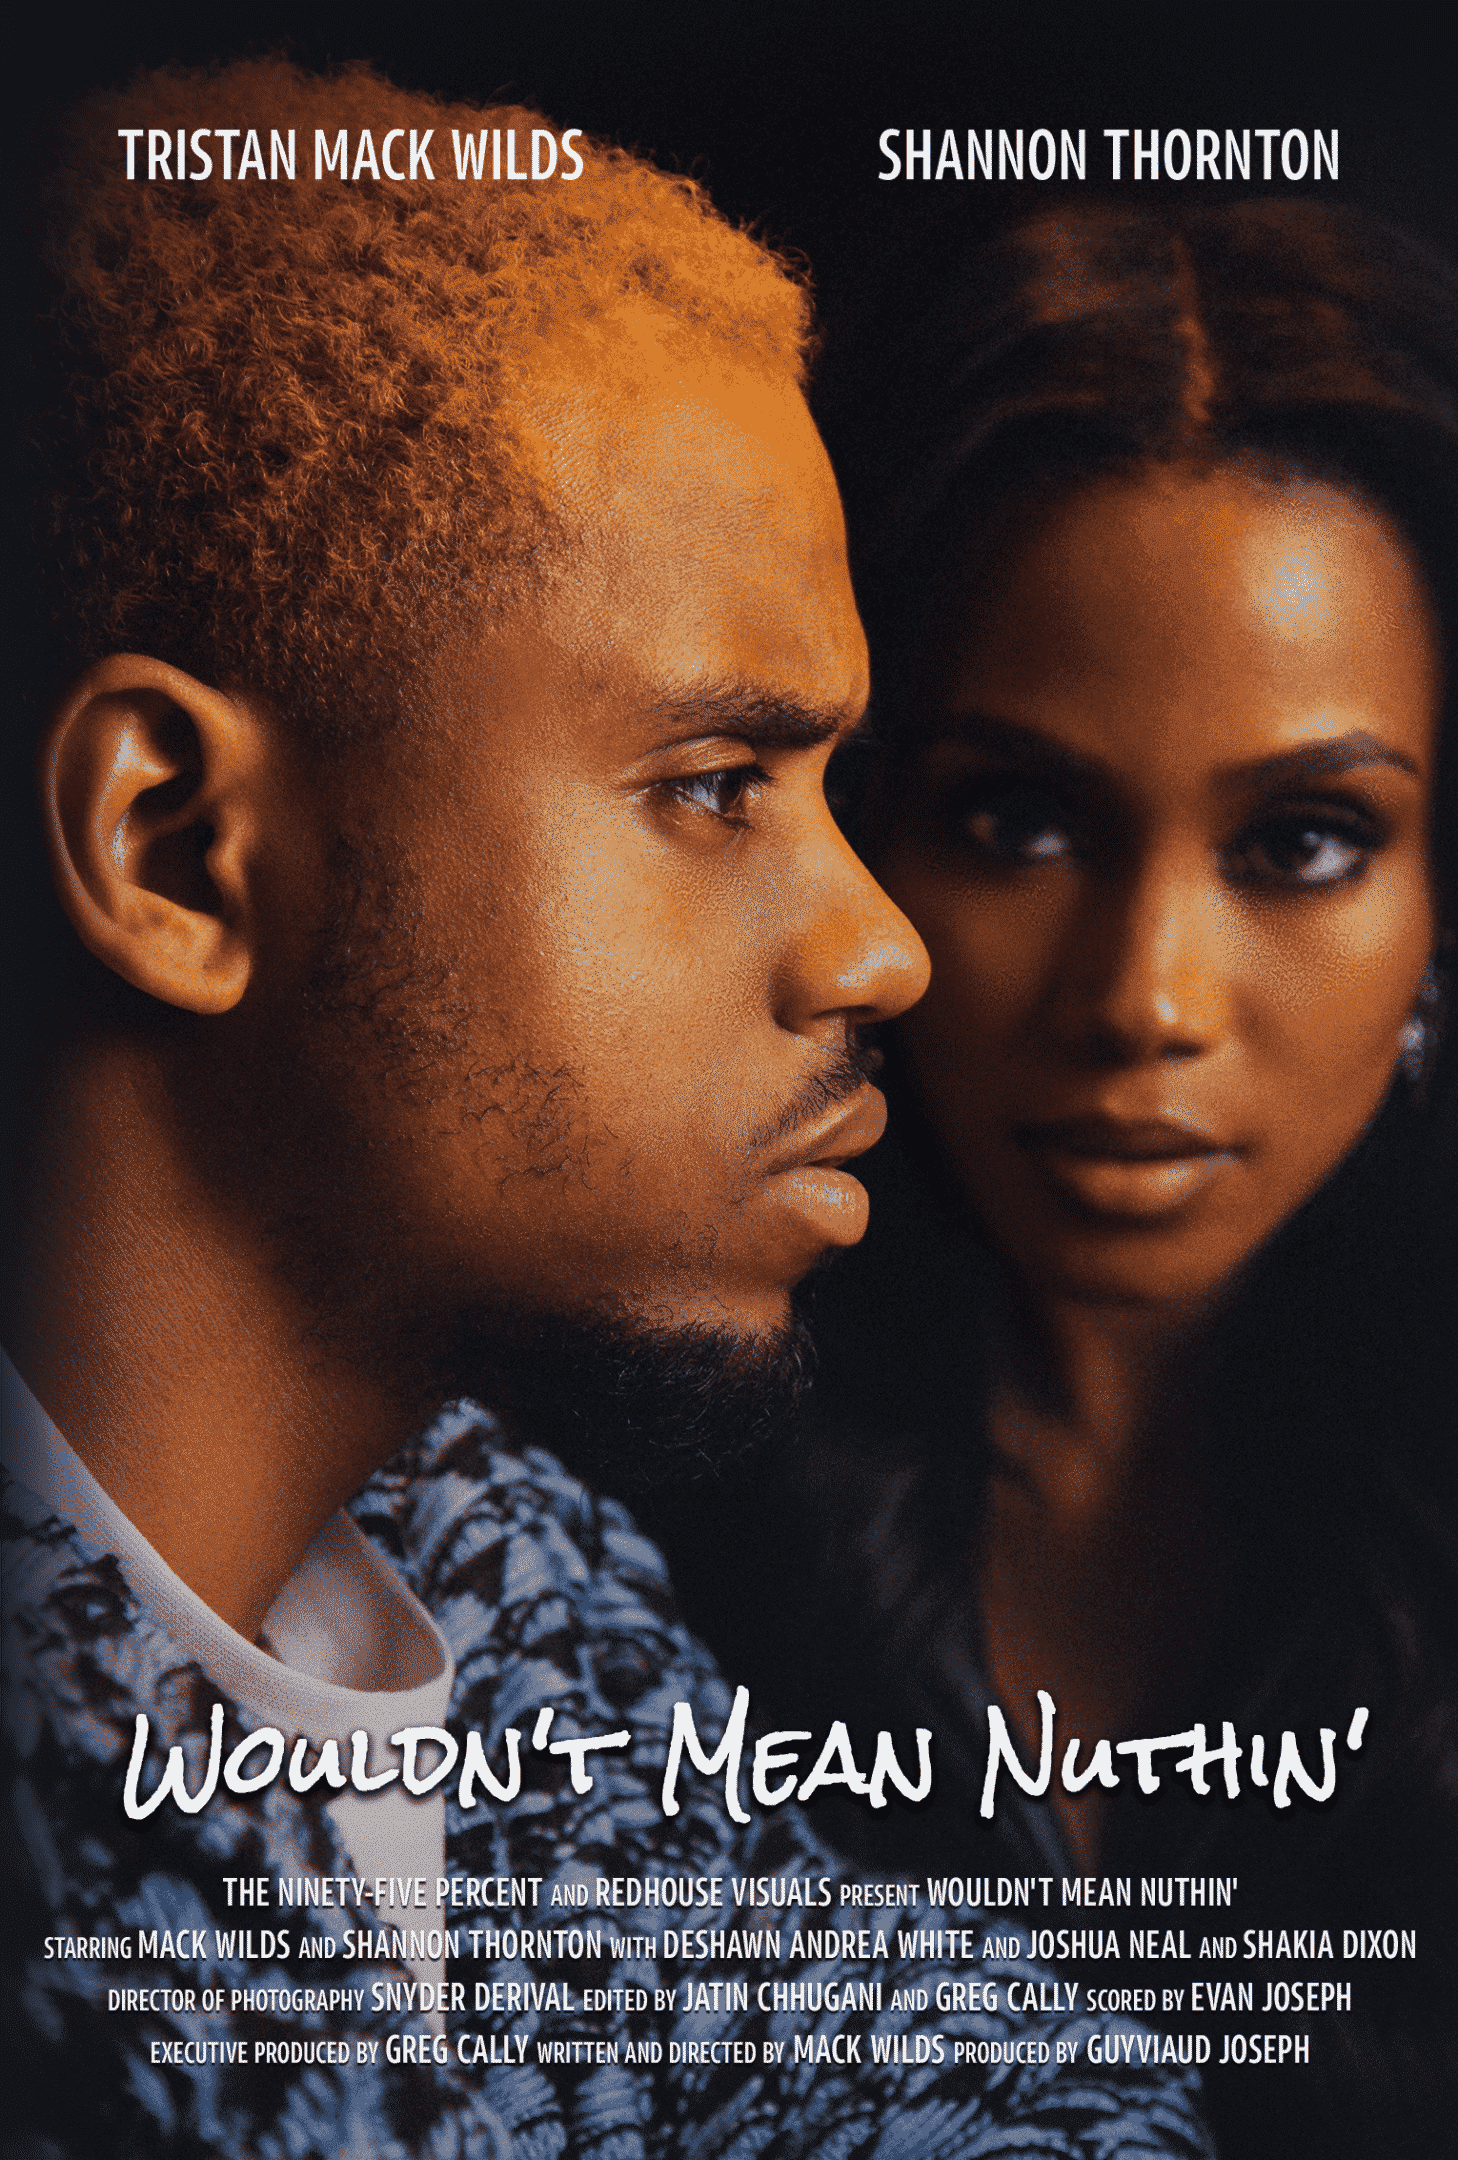 Wouldn't Mean Nuthin' (2021) mmovie poster featuring Tristan Mack Wilds and Shannon Thornton on the cover